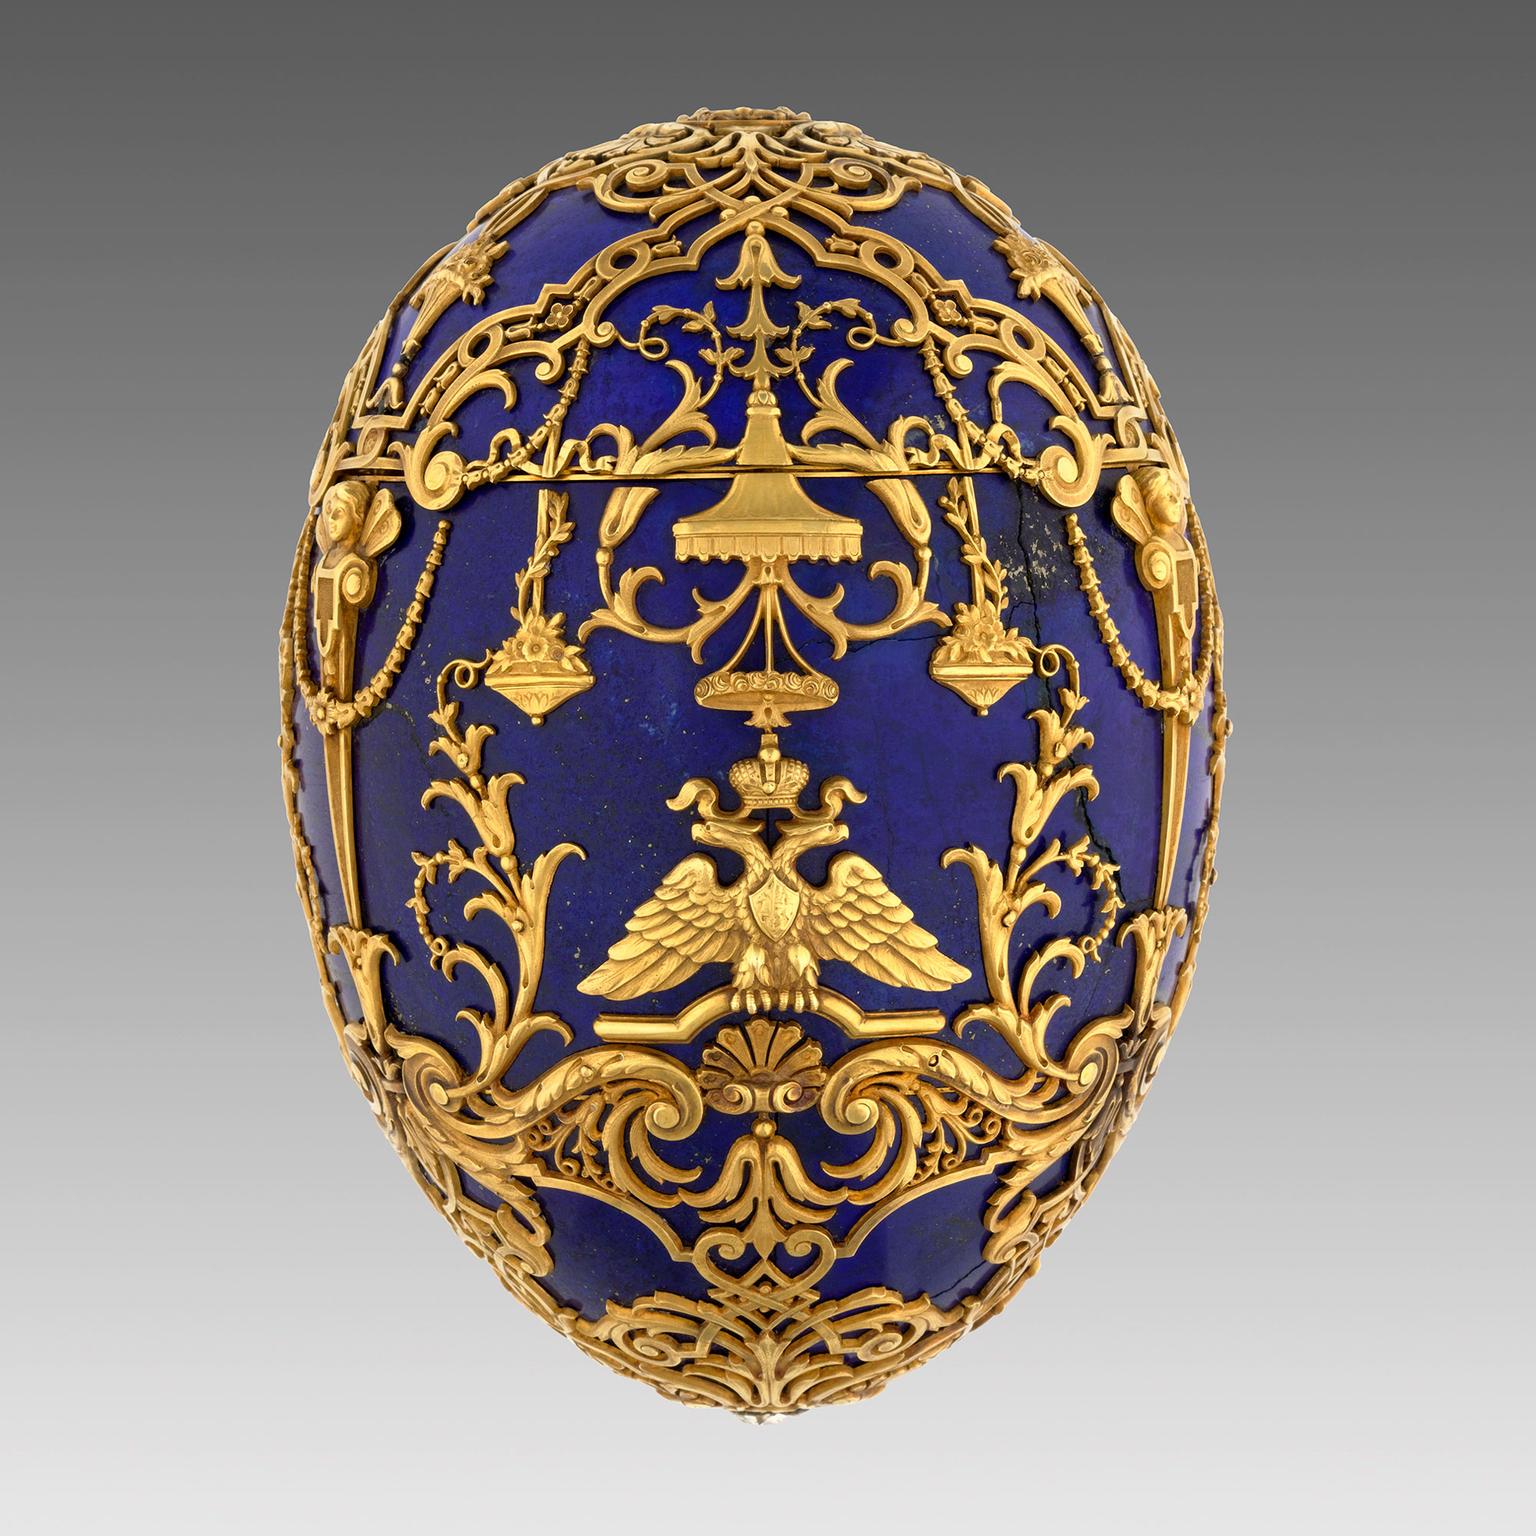 Faberge Imperial Tsarevich Easter egg 